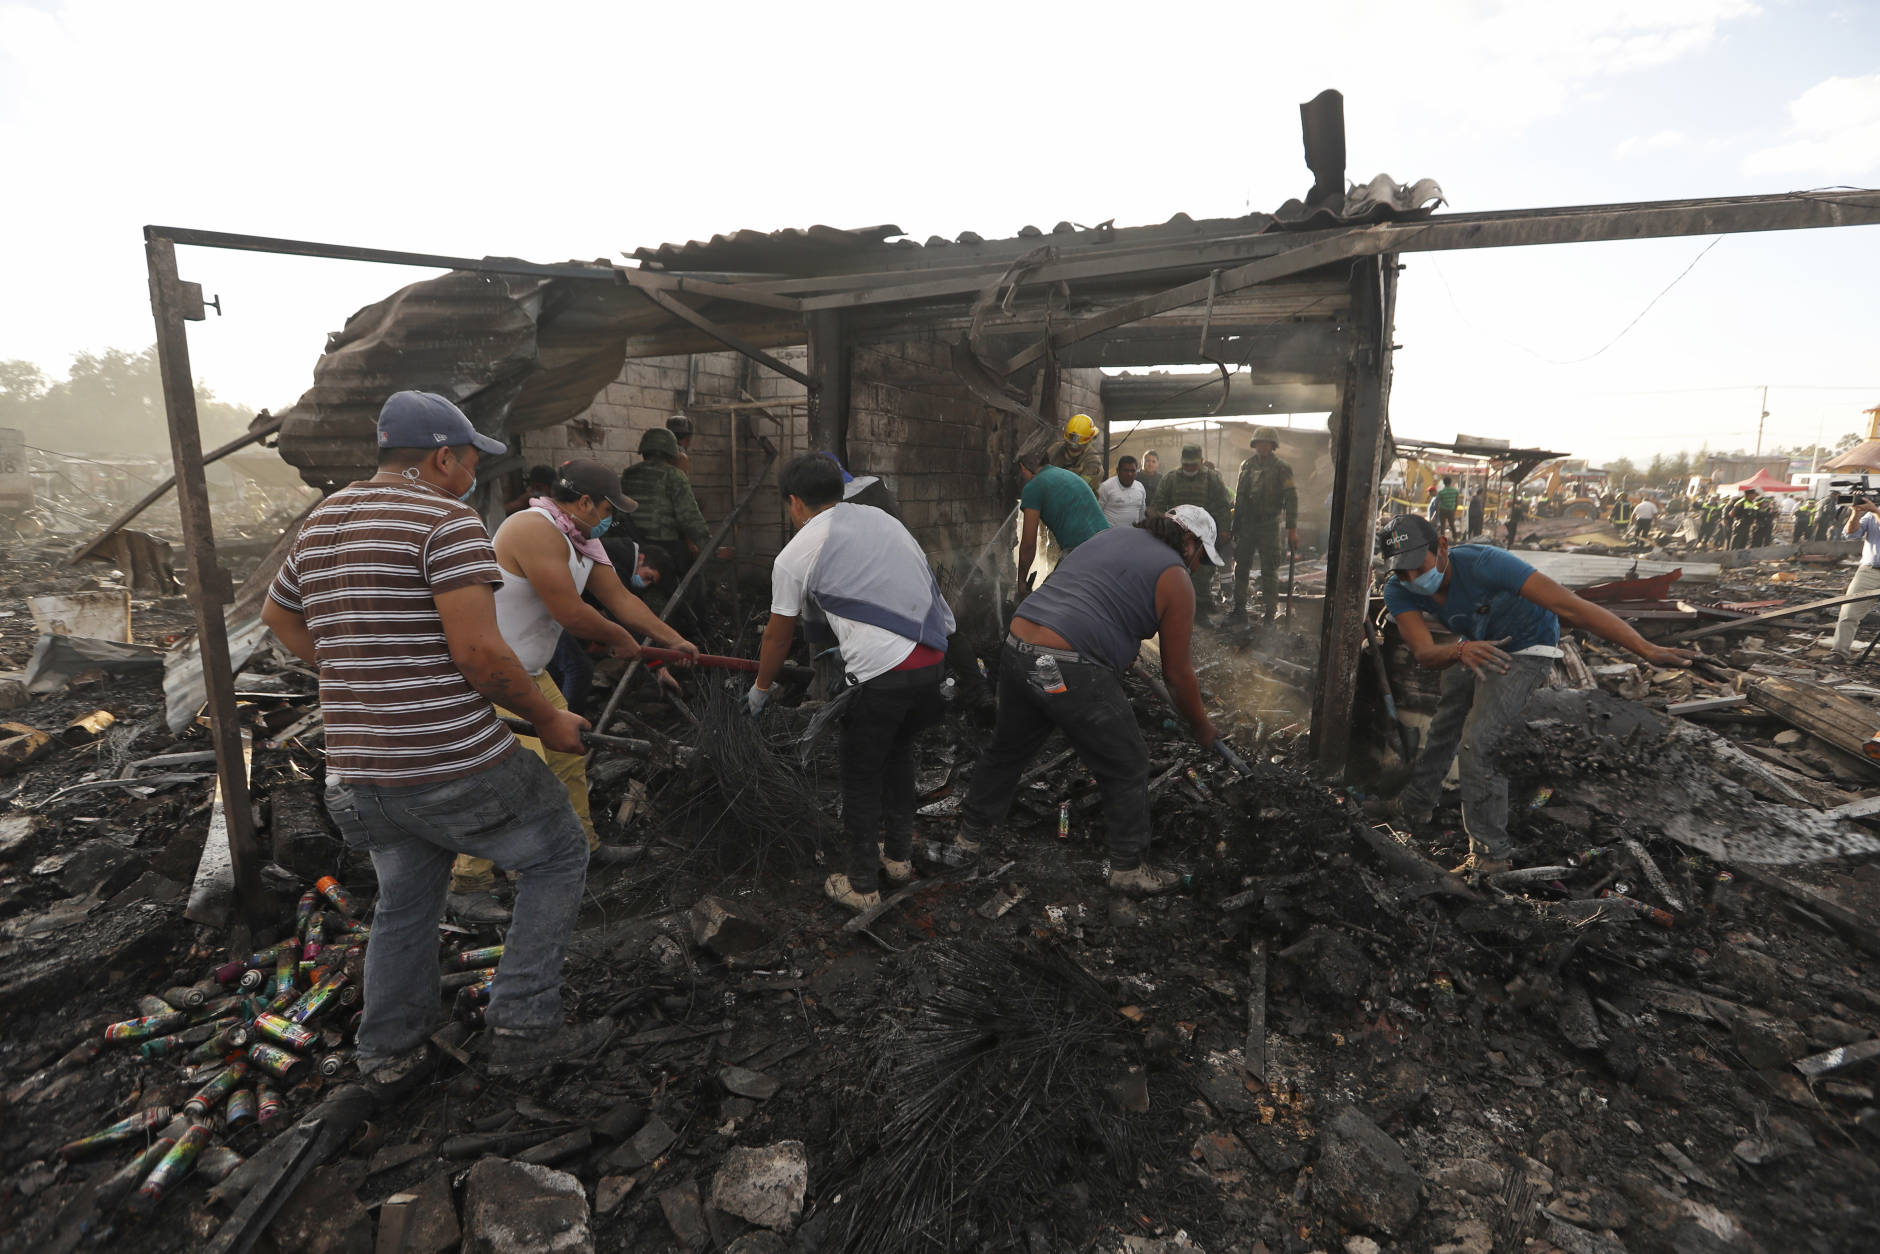 Local residents comb through ashes and rubble at the scorched ground of Mexico's best-known fireworks market after an explosion explosion ripped through it, inTultepec, Mexico, Tuesday, Dec. 20, 2016. National Civil Protection Coordinator Luis Felipe Puente told Milenio TV that dozens were hurt but he had no immediate report of any fatalities at the open-air San Pablito Market in Tultepec, in the State of Mexico. (Eduardo Verdugo/AP Photo)